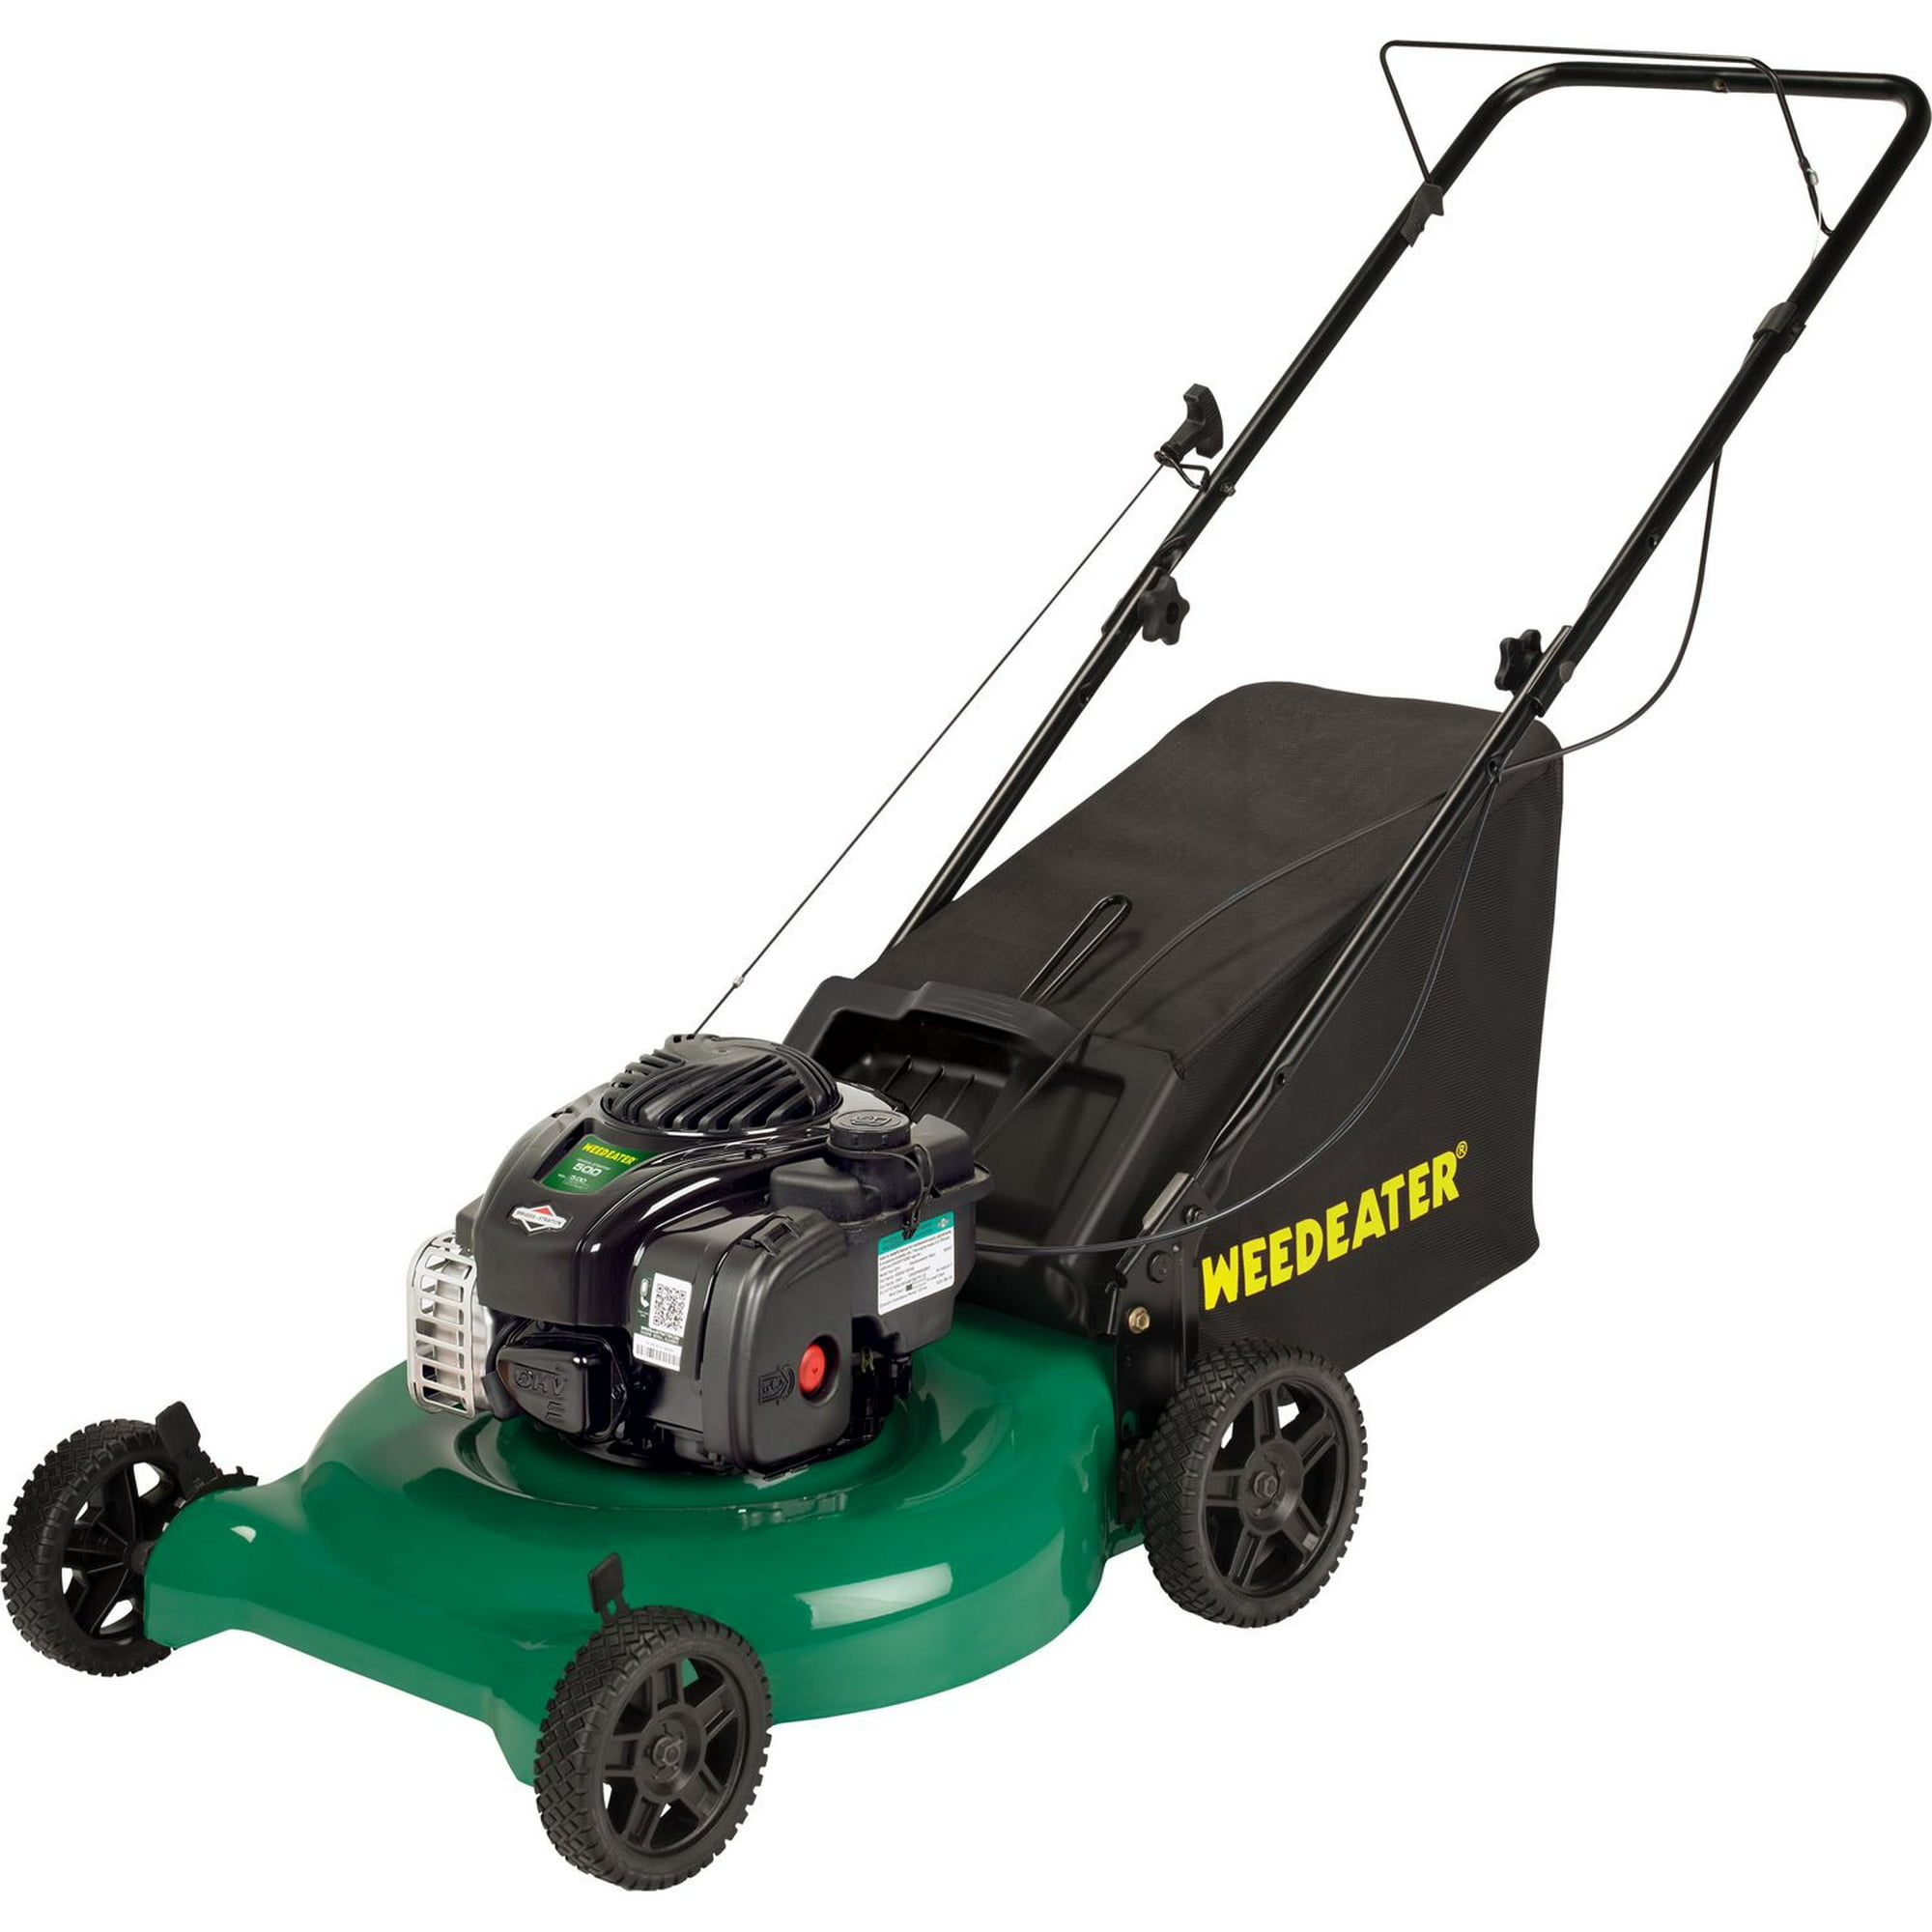 Earthwise Lawn Mowers, Parts & Accessories for sale